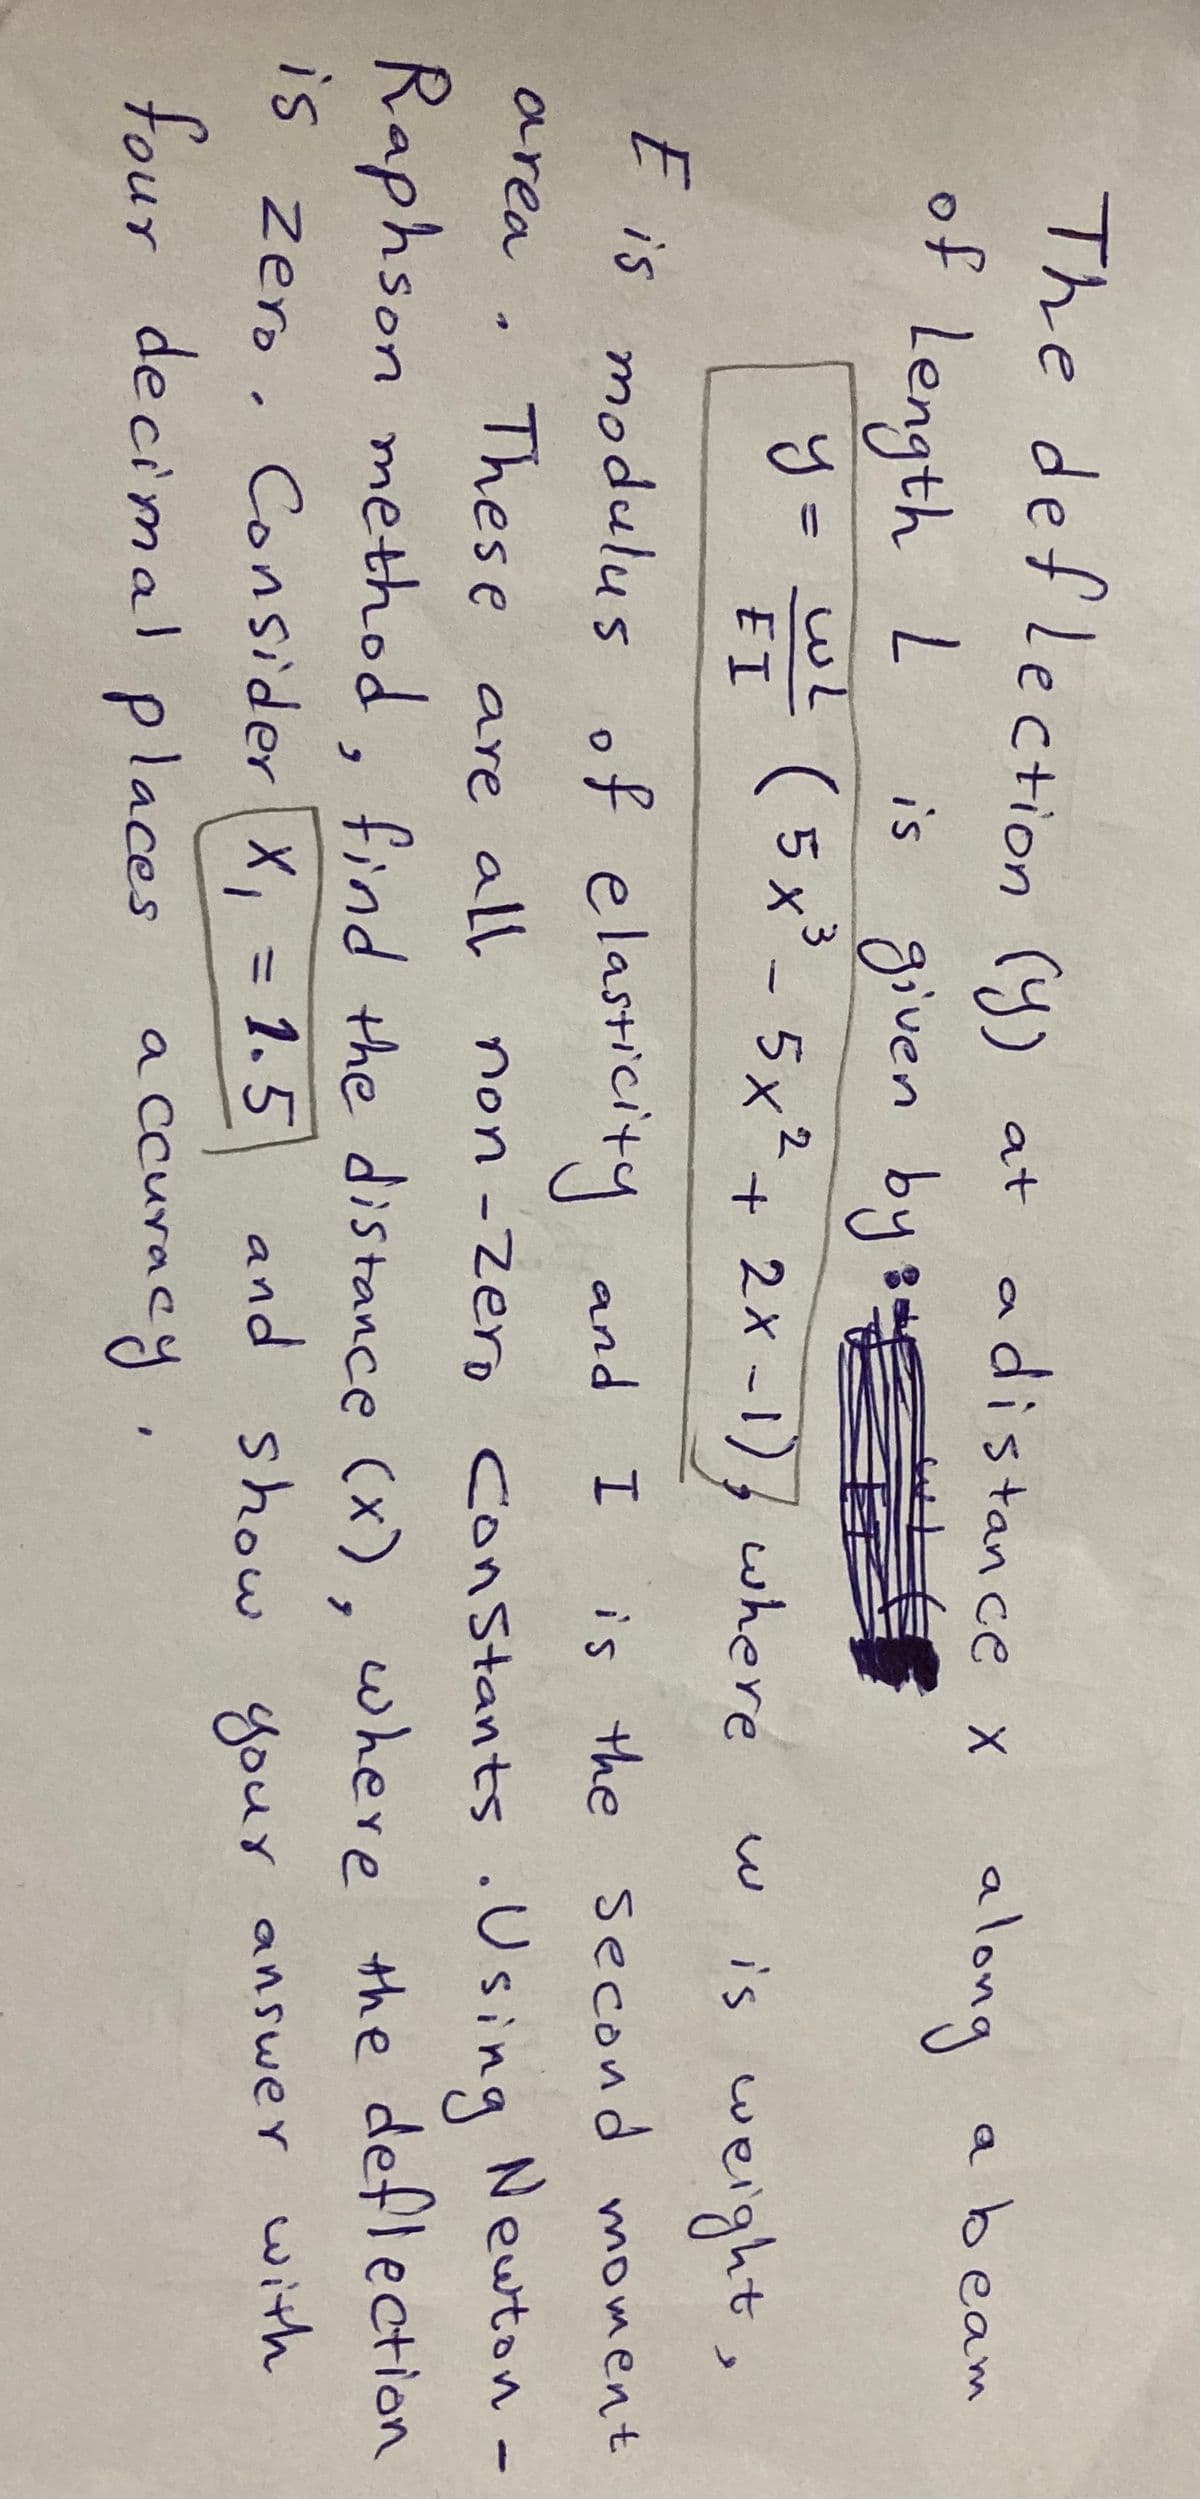 The deflection (y) at
adistan ce x along
abeam
of Length L
is given by sE
(5x²- 5x².
+ 2X -1), where
w is weight,
E I
E is modulus of elasticity
is the second moment
Newton -
area
Thes e are all non -Zero
Constants .Using
Raphson method, find the distance (x). where the deflection
and show
Consider X, = 1.5
your answer with
IS Zero.
four decimal places
a ccuracy,
